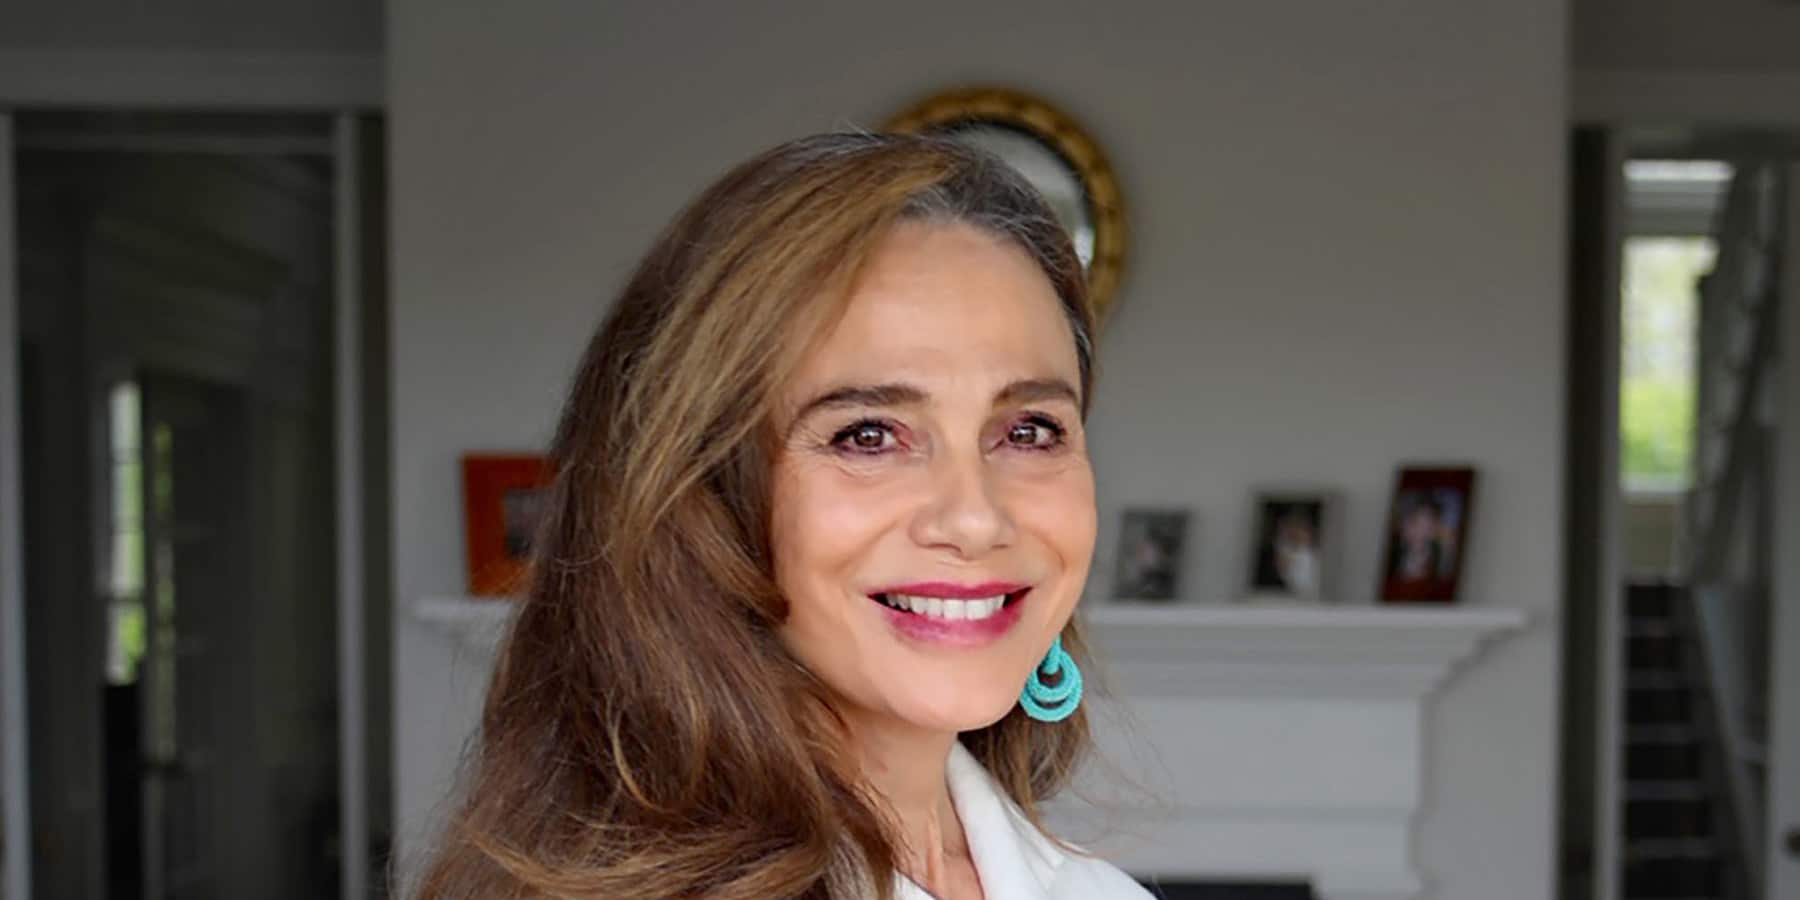 What happened to Lena Olin? What is she doing today? Biography